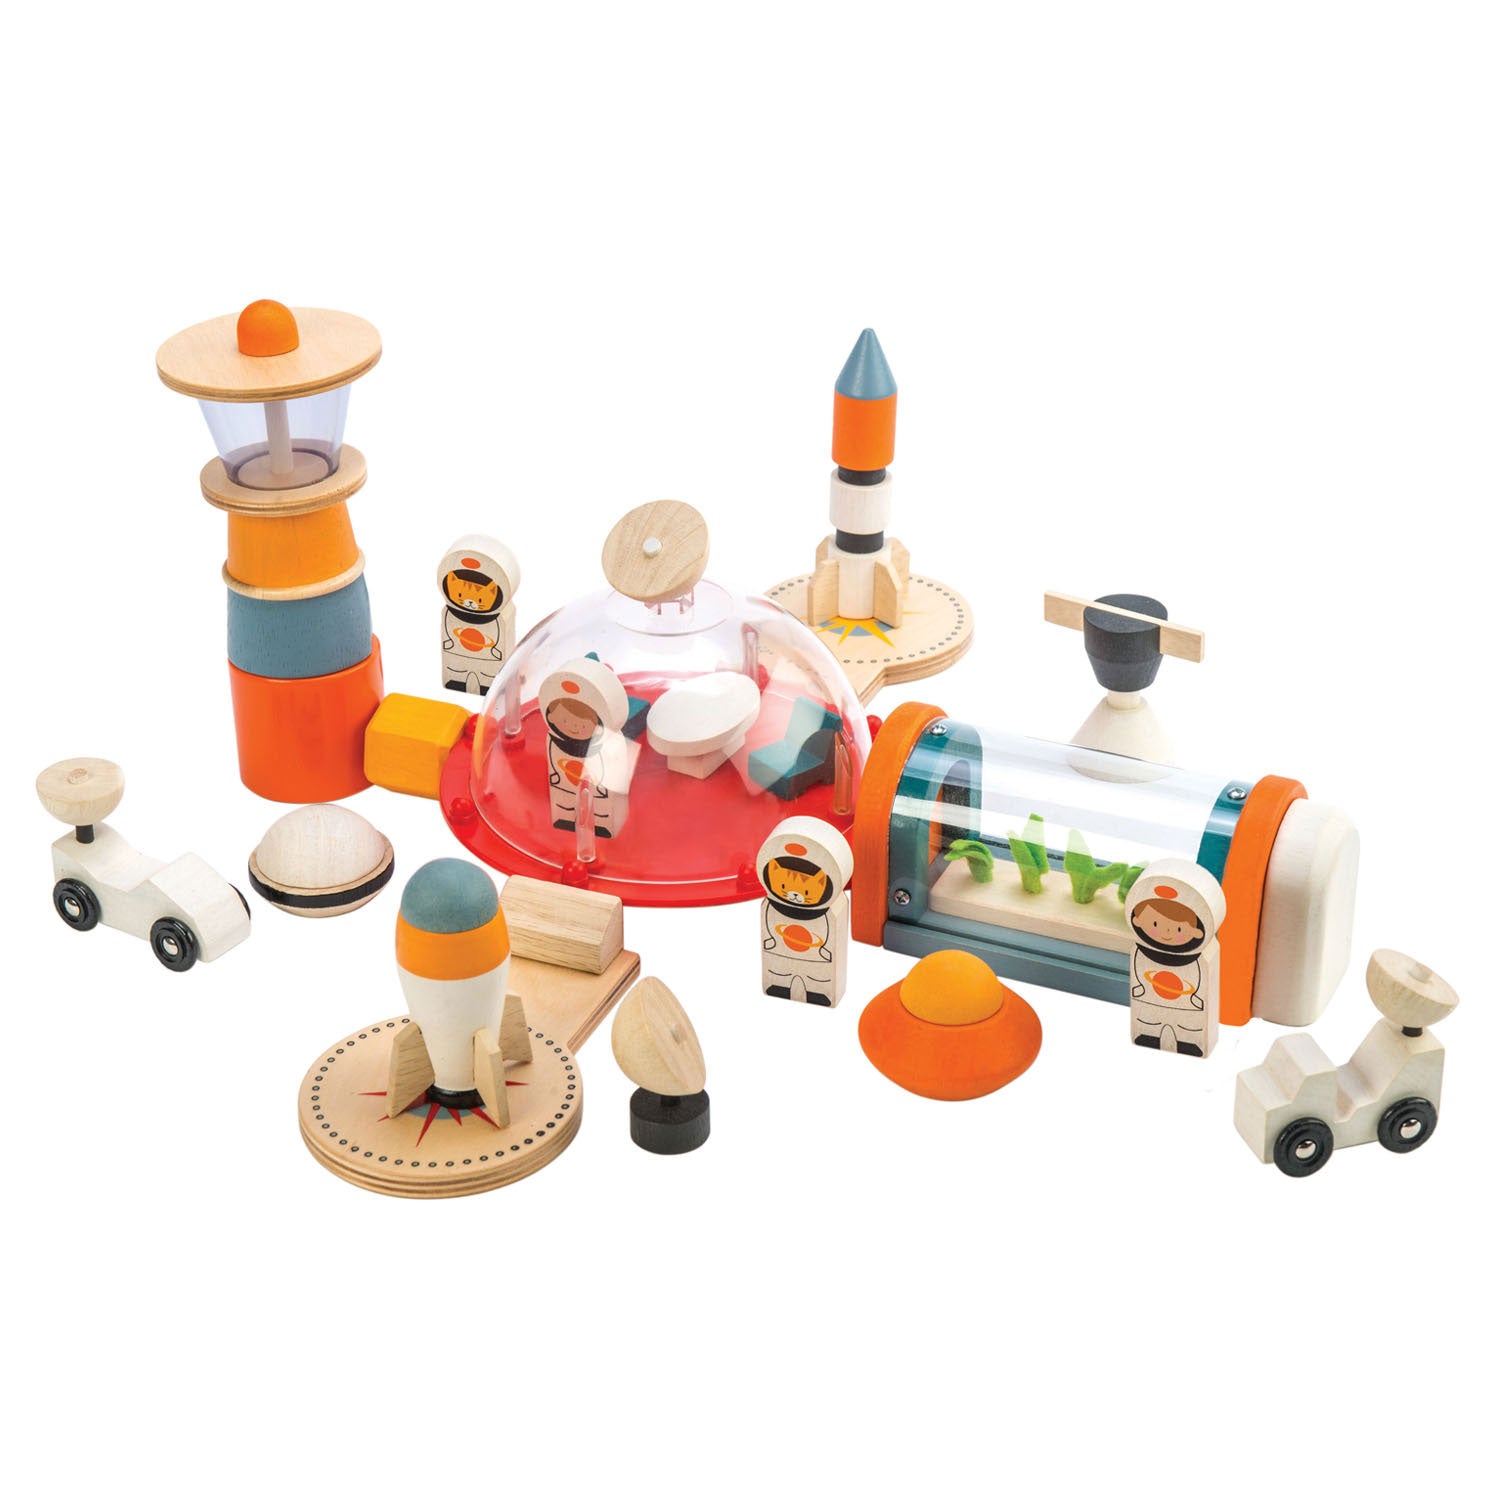 <p>Reach for the stars with our Life on Mars set. Your little astronauts will love the realistic space station with its communication towers, astronauts and UFOs. Helps to create interest for astrology and science, as well as endless fun and creative role play.</p>
<p>Age range: 3 Years And Older  </p>
<p>Product size: 17.52&quot; x 17.20&quot; x 7.28&quot;  </p>
<p>Weight: 2.35 lbs</p>
